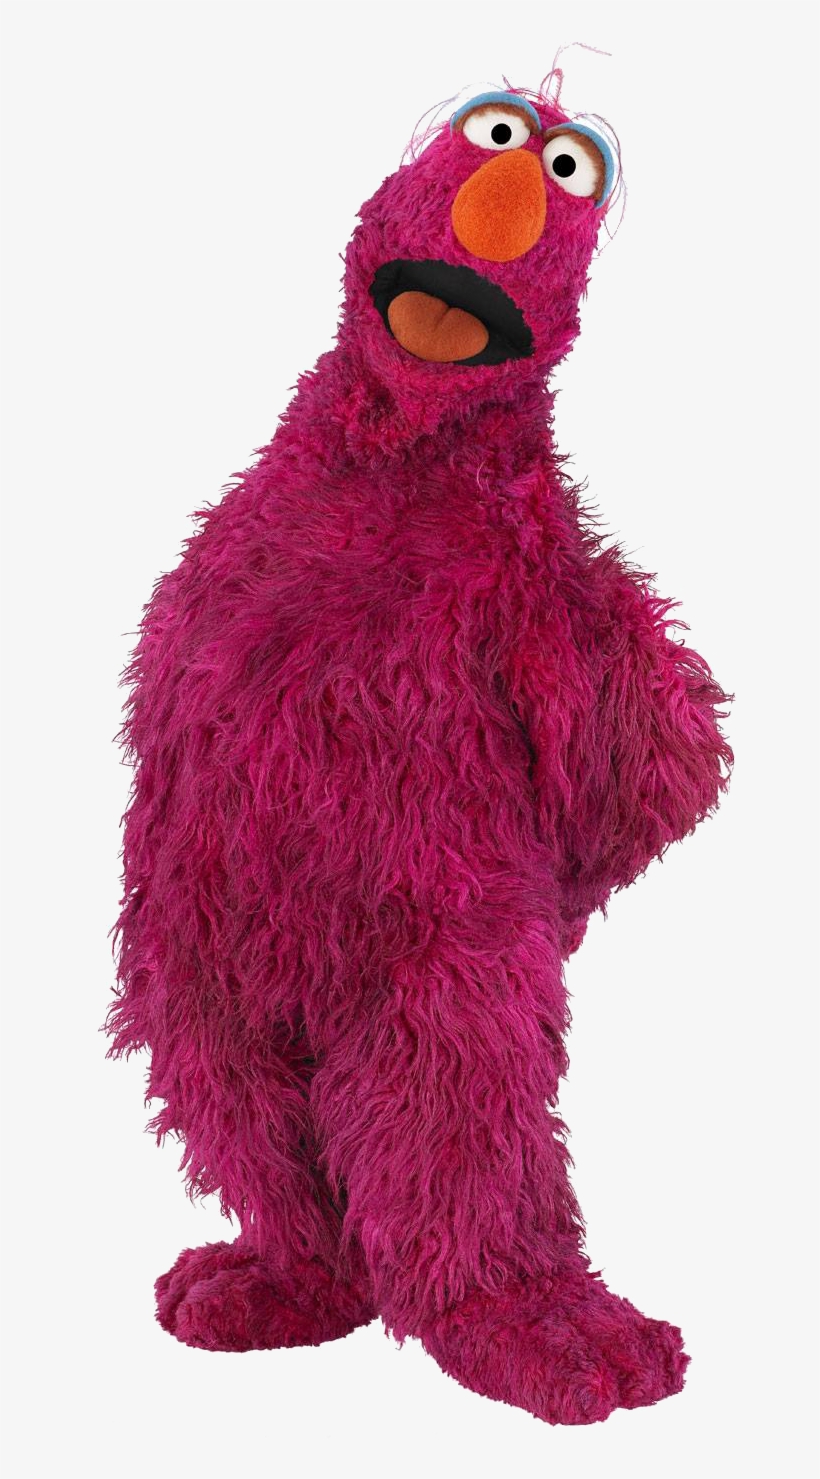 Sesame Street Character Png - Telly Monster Png, transparent png #544548